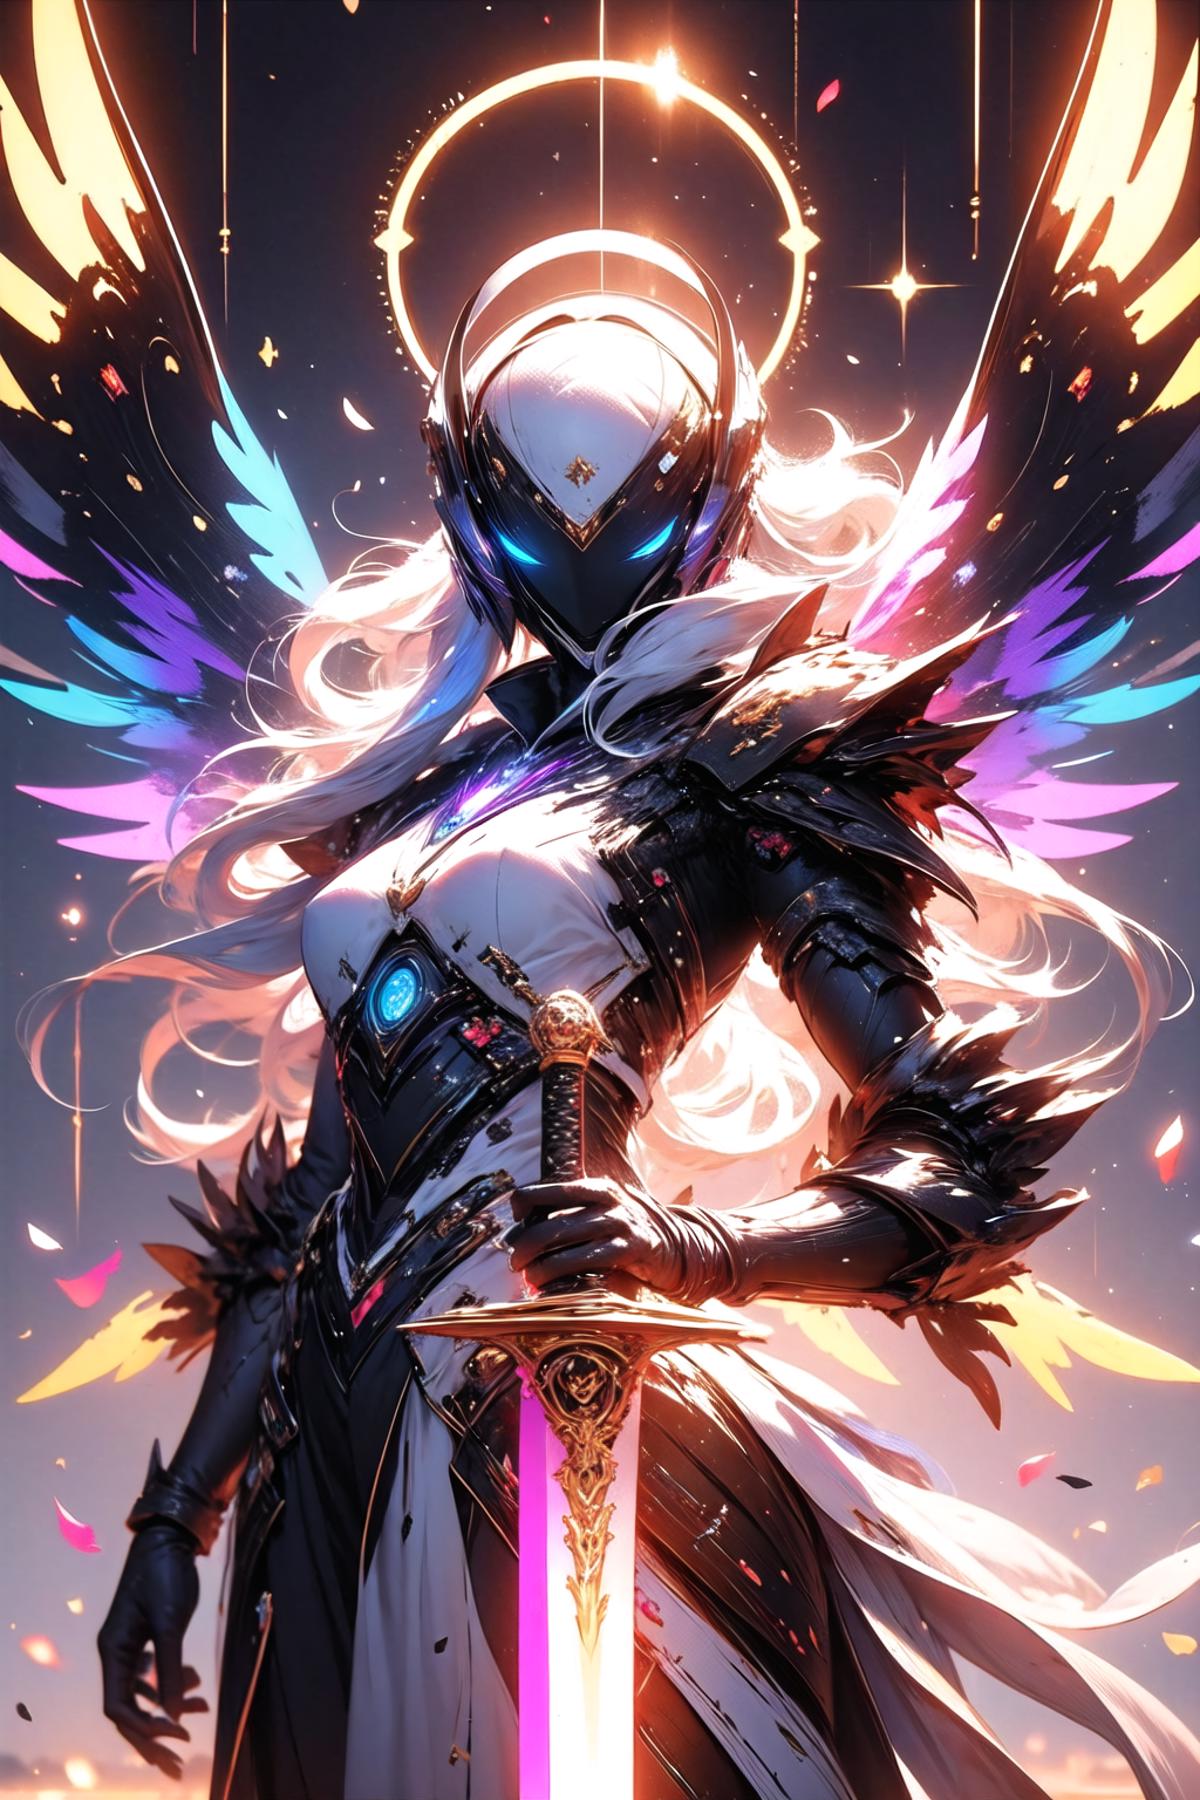 A fantasy artwork of a woman with white hair and blue eyes, wearing a helmet and holding a sword. She is surrounded by colorful wings, giving her the appearance of a warrior angel.